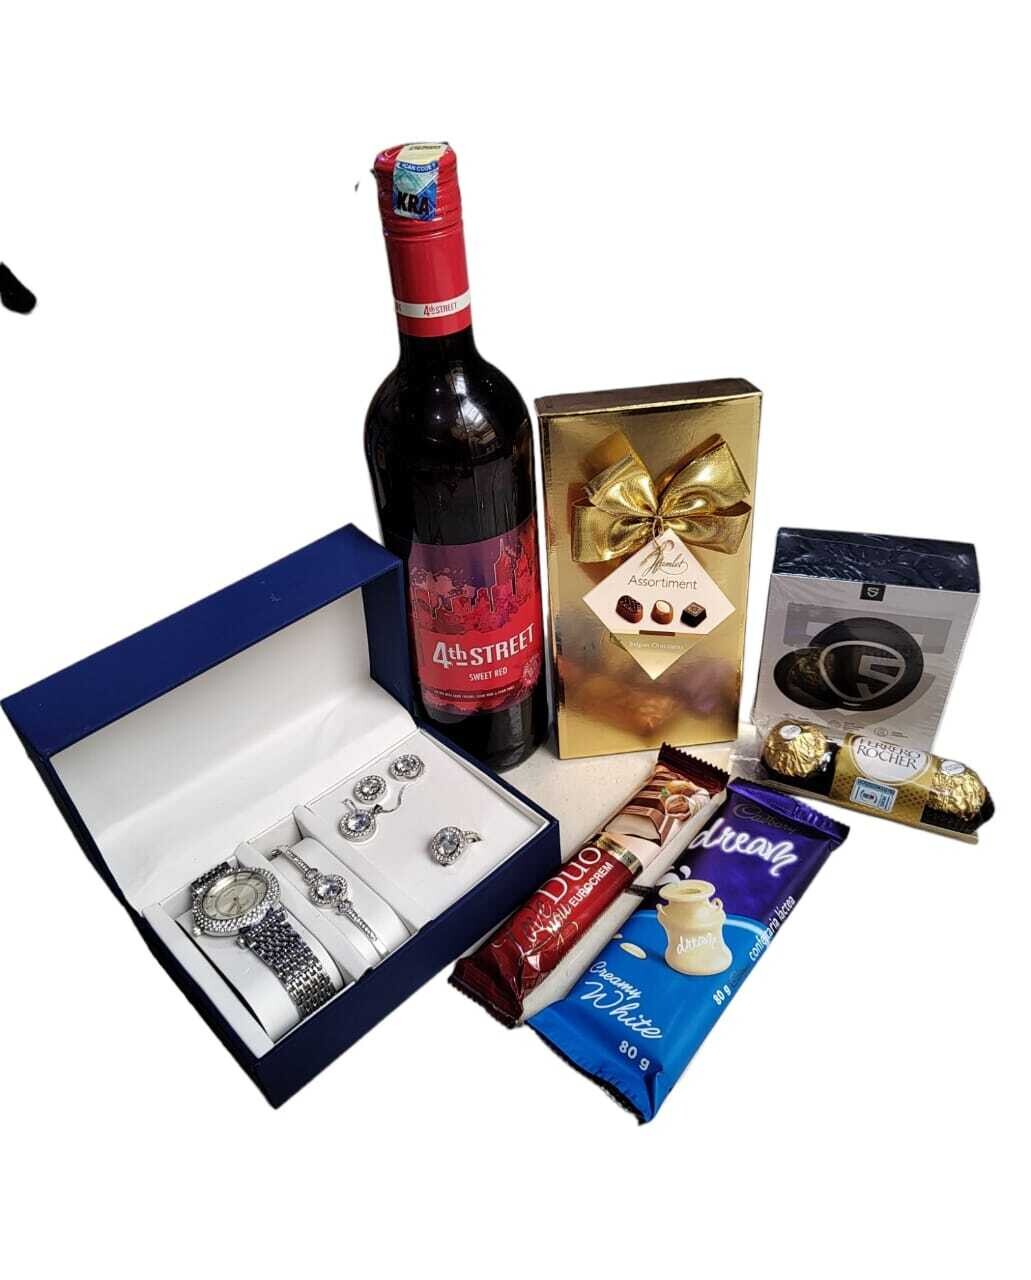 Esquisite gift package with assorted chocolates, ladies giftset, soundpeats earbuds & 4th street wine